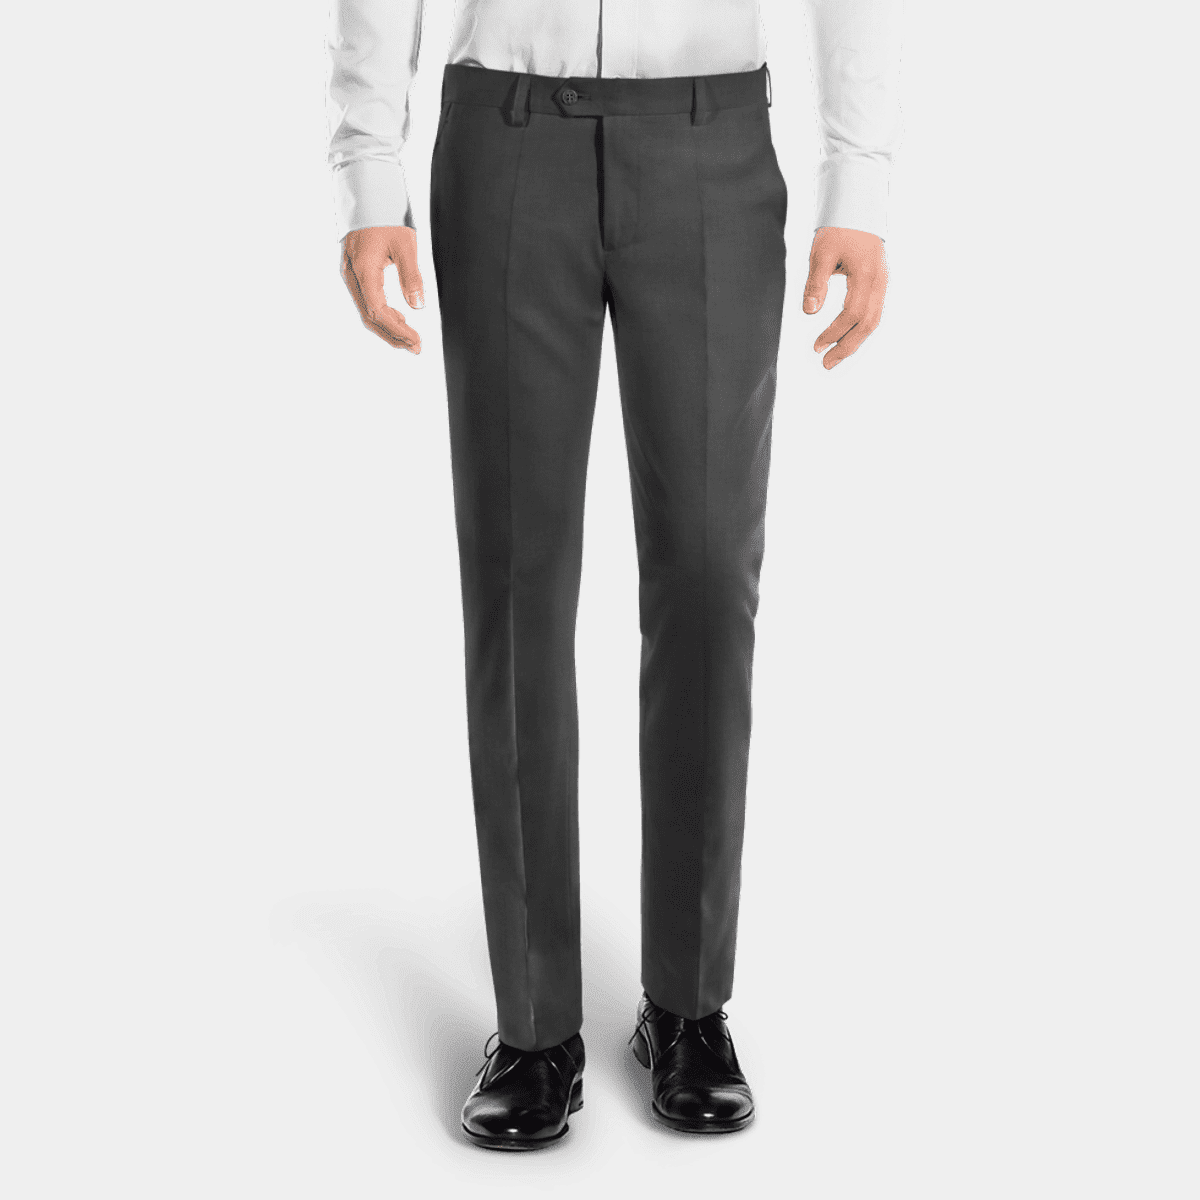 Mens Grey Suit Trousers | House of Fraser